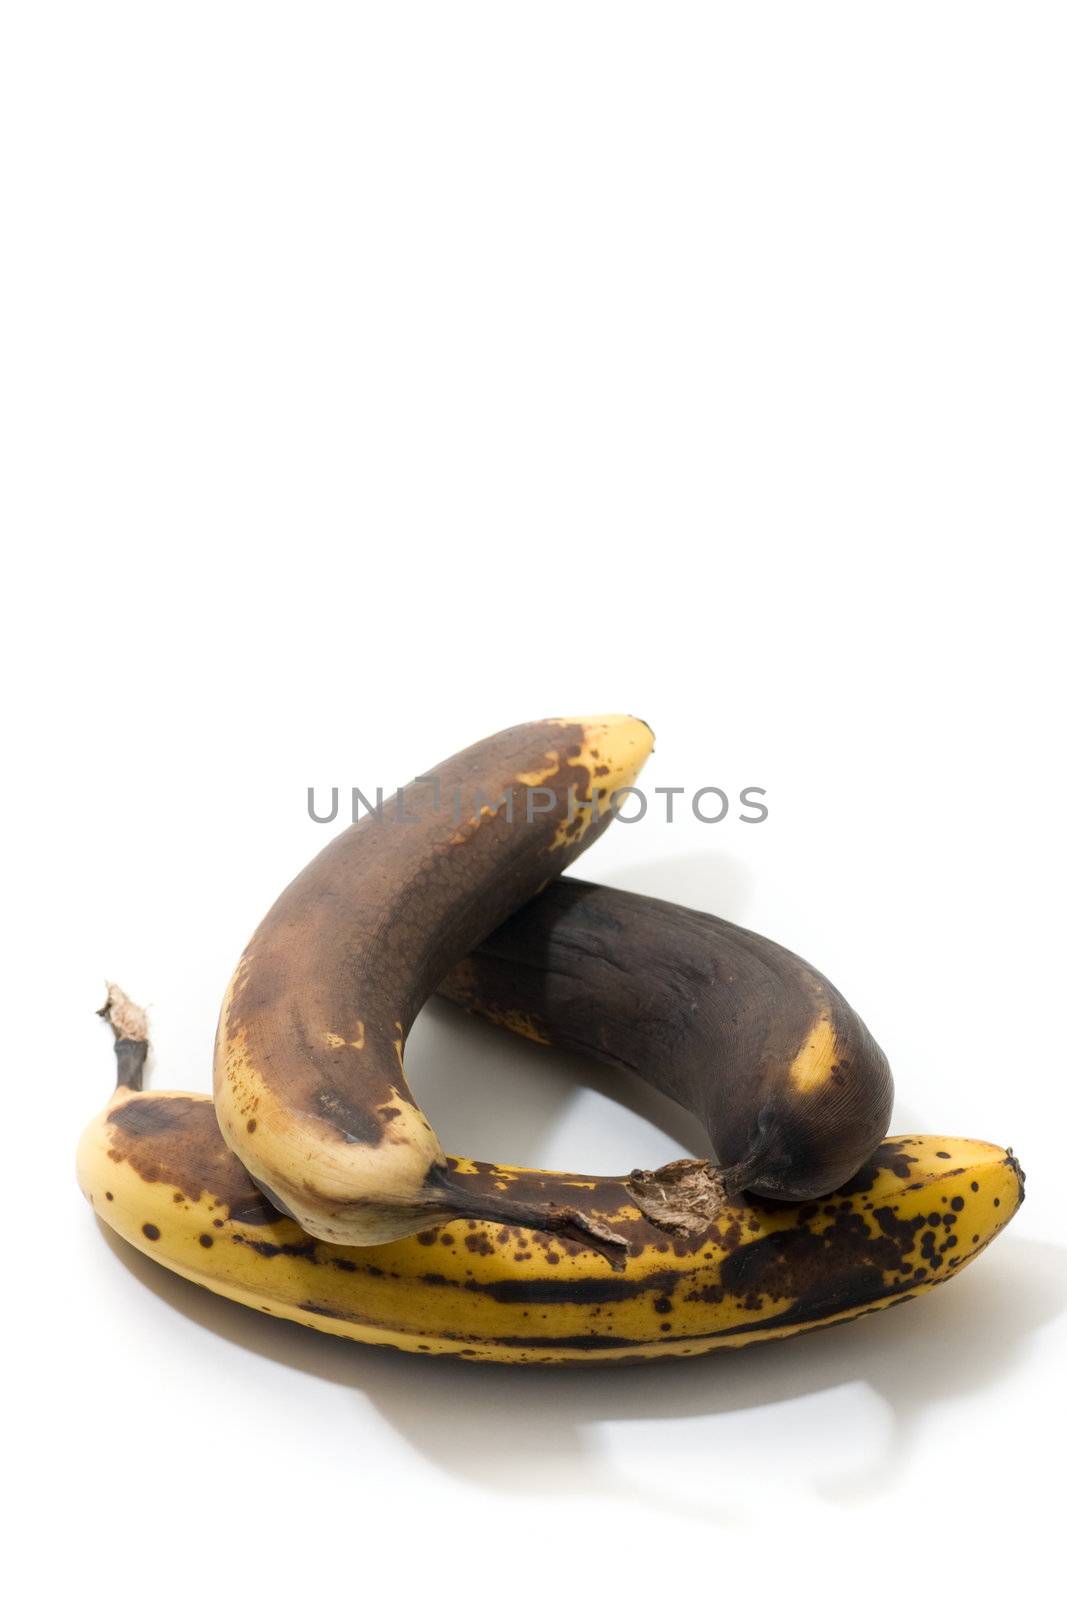 3 over-ripened bananas, arranged in a circular shape, isolated on white.